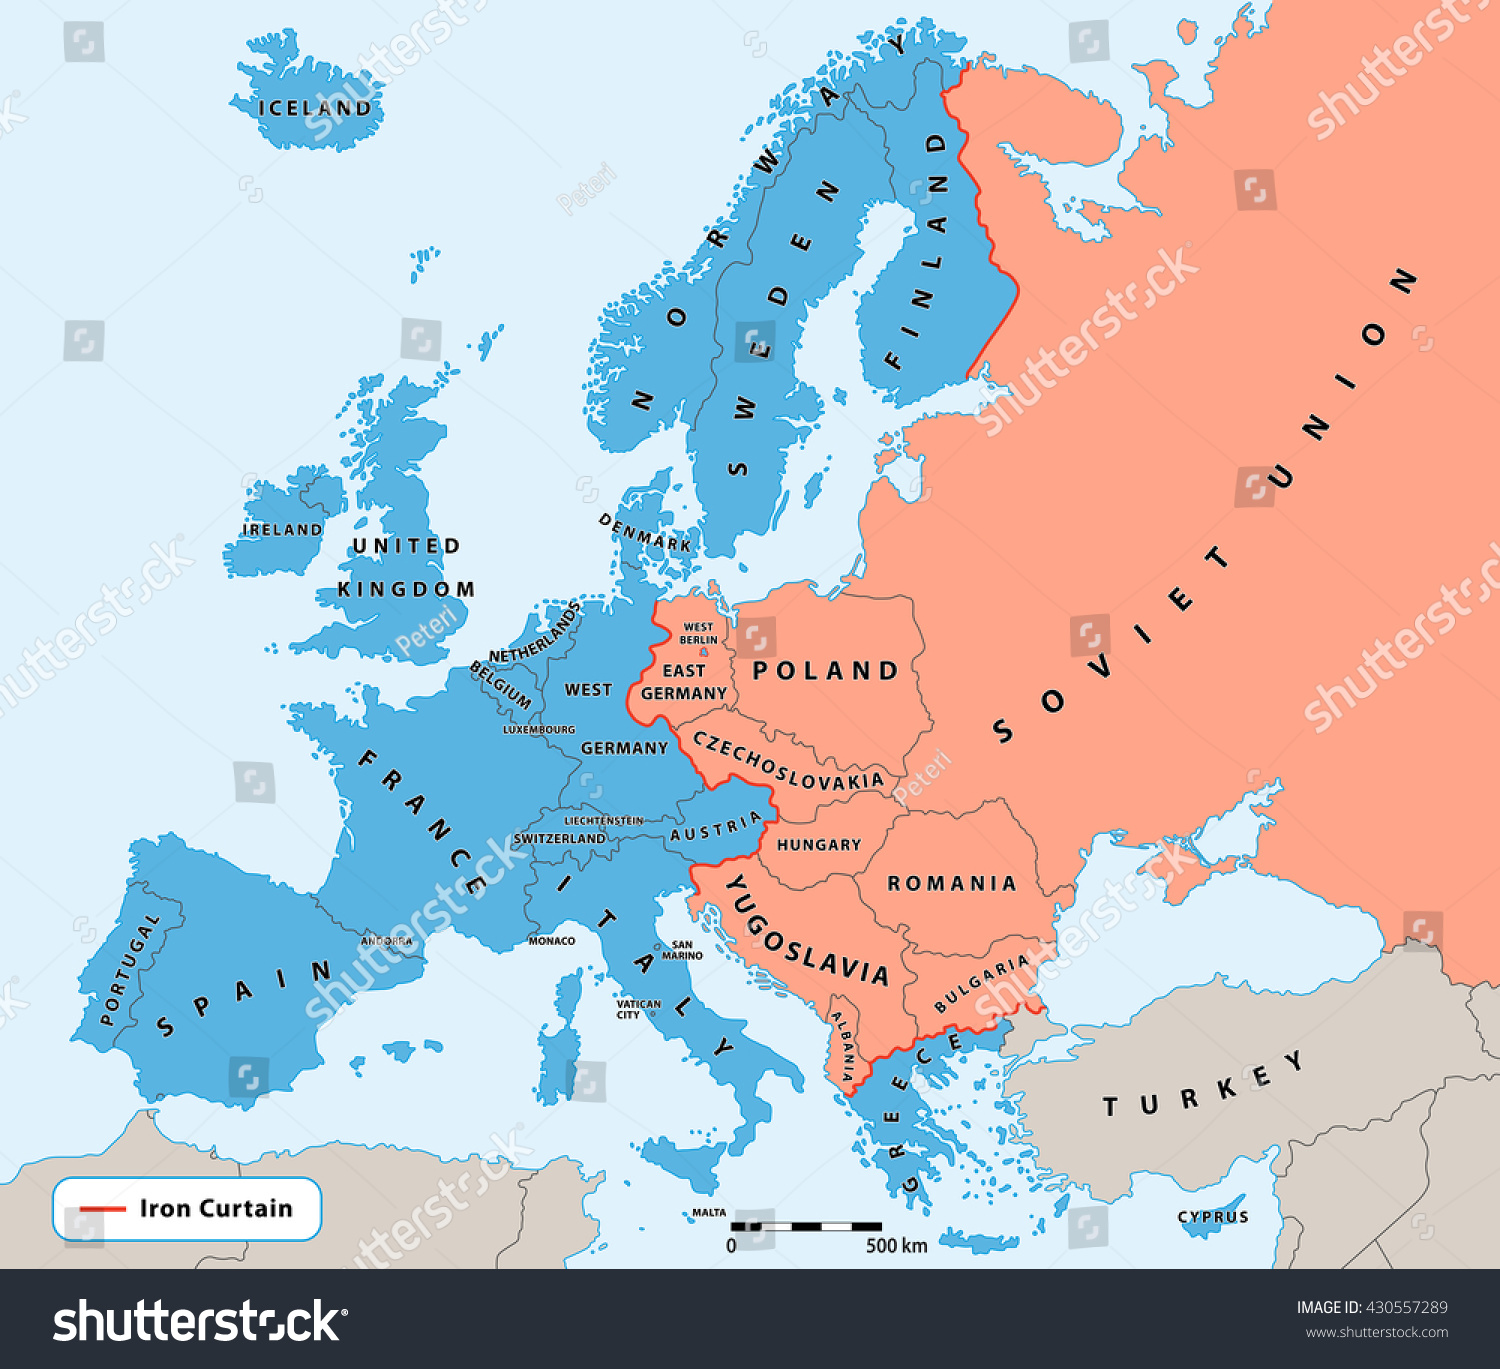 stock-vector-iron-curtain-cold-war-era-on-europe-political-map-divided-europe-in-years-all-data-430557289.jpg